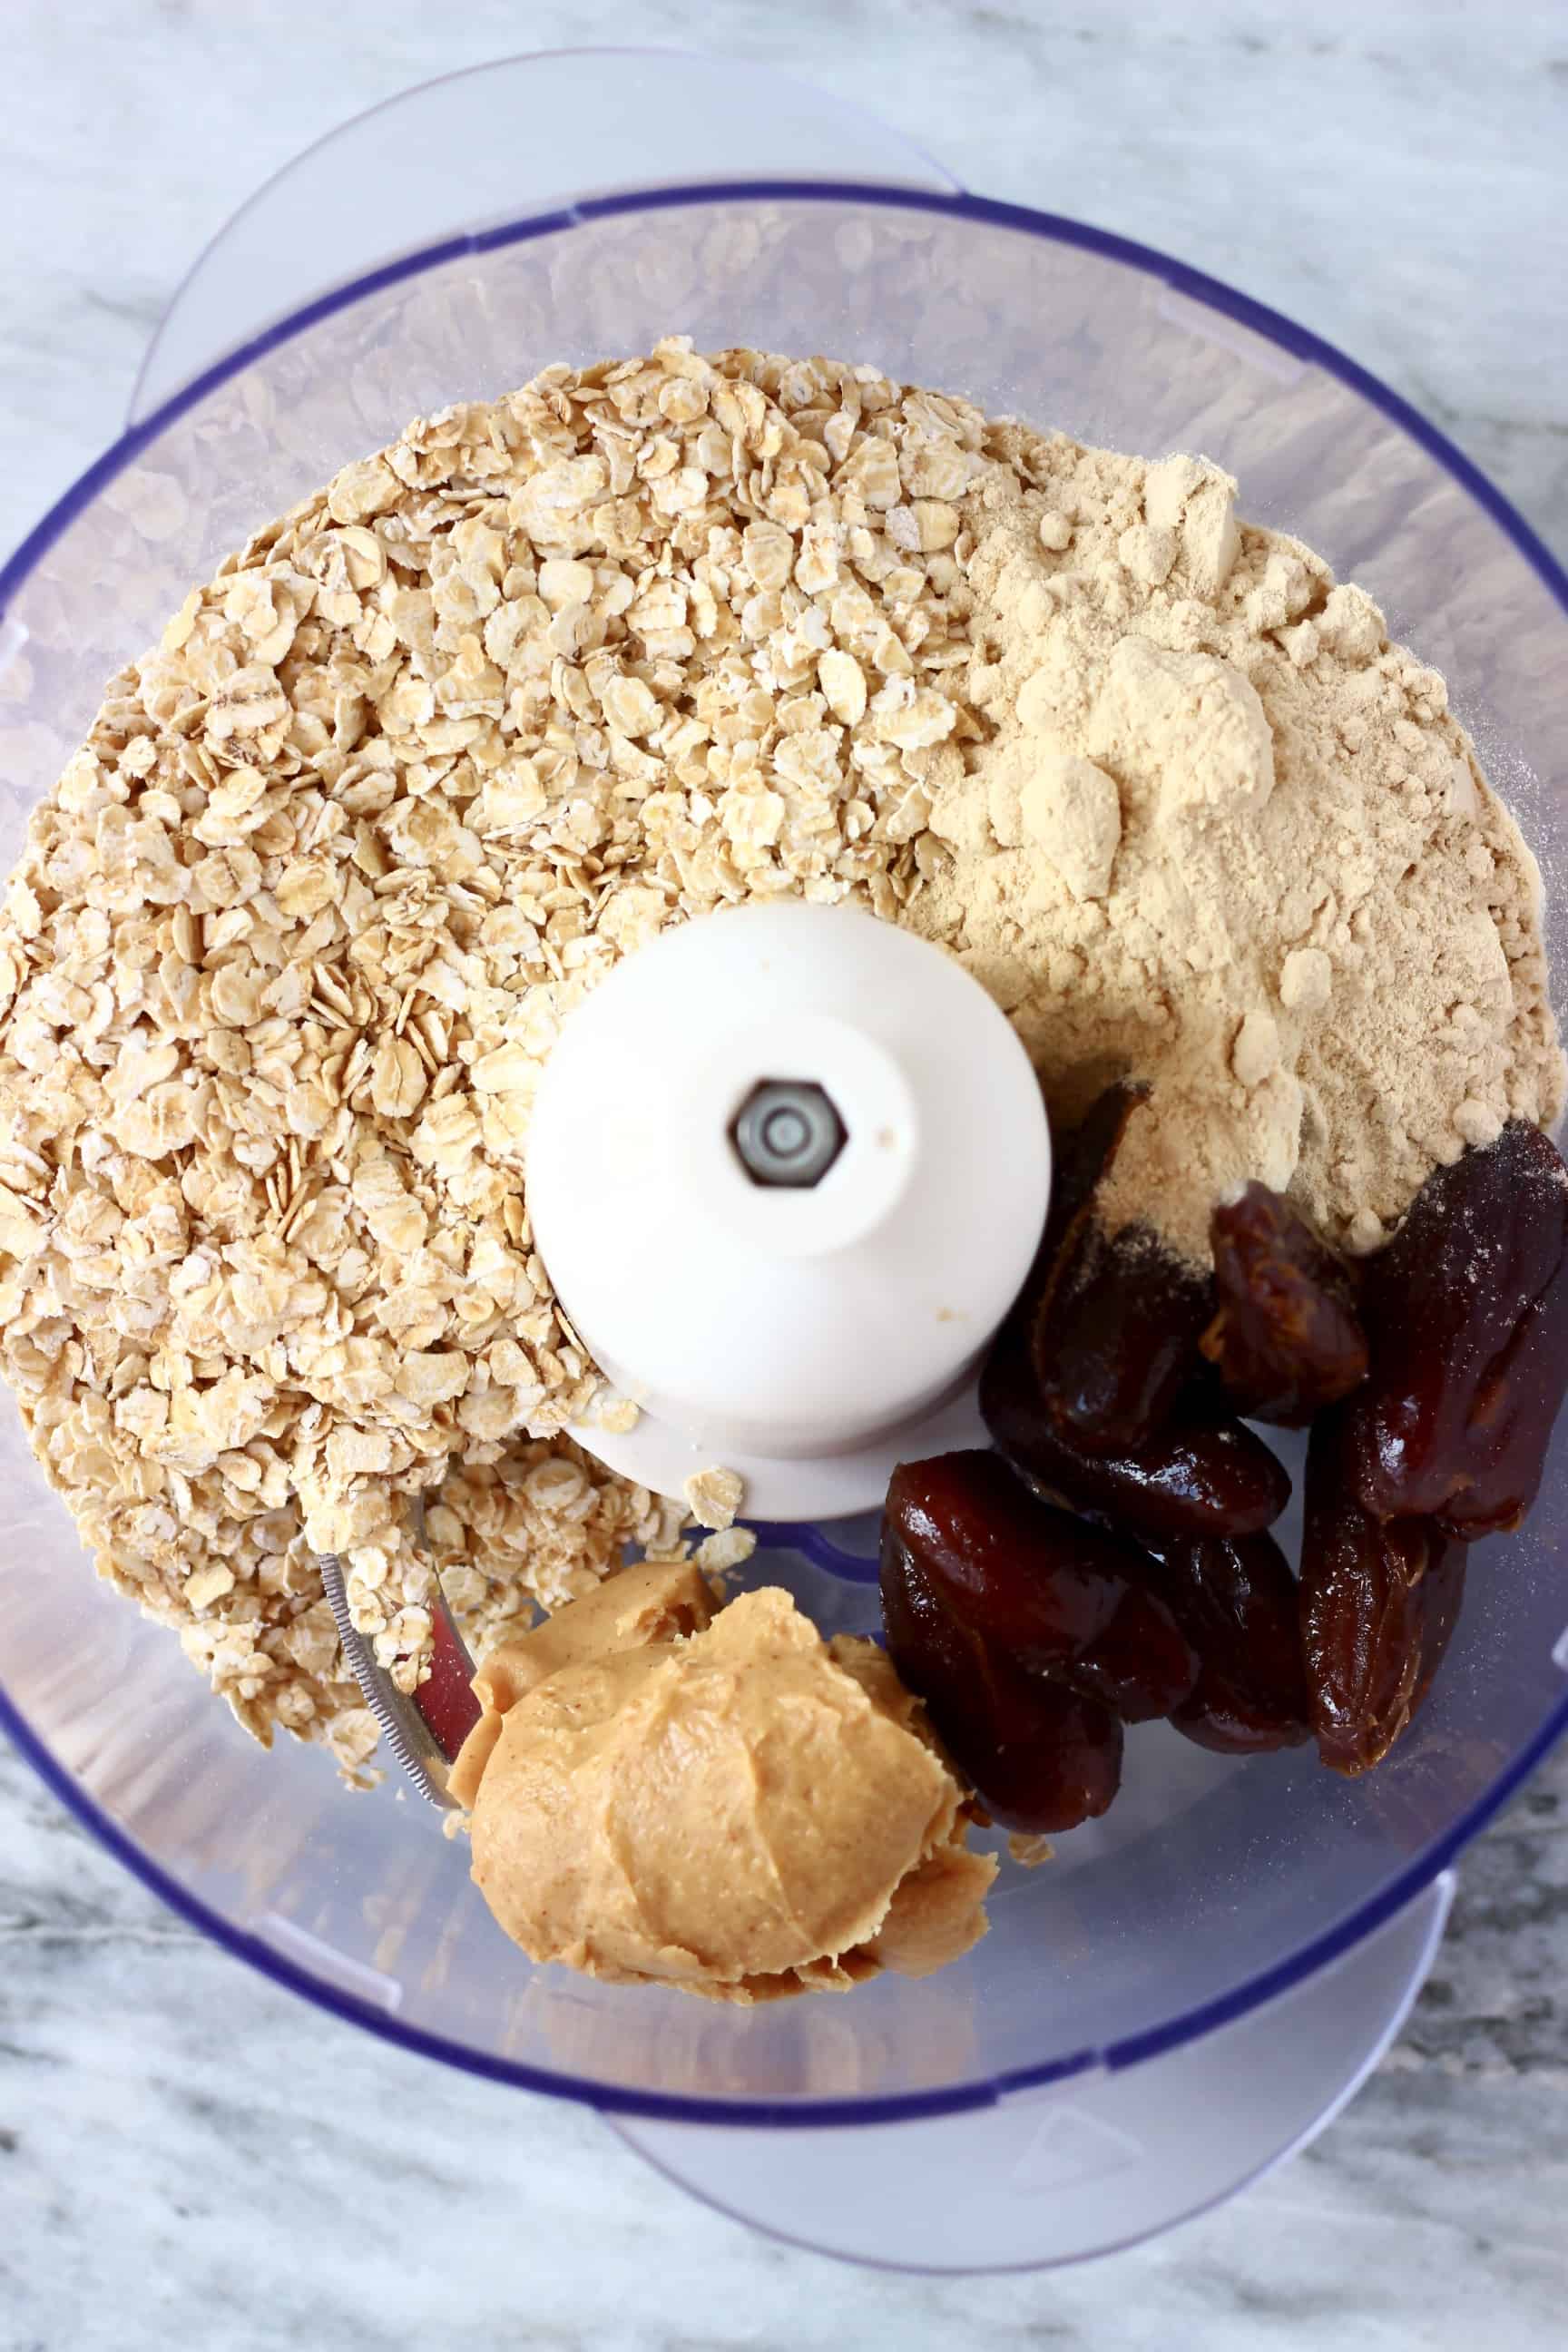 Oats, vegan protein powder, peanut butter and dates in a food processor